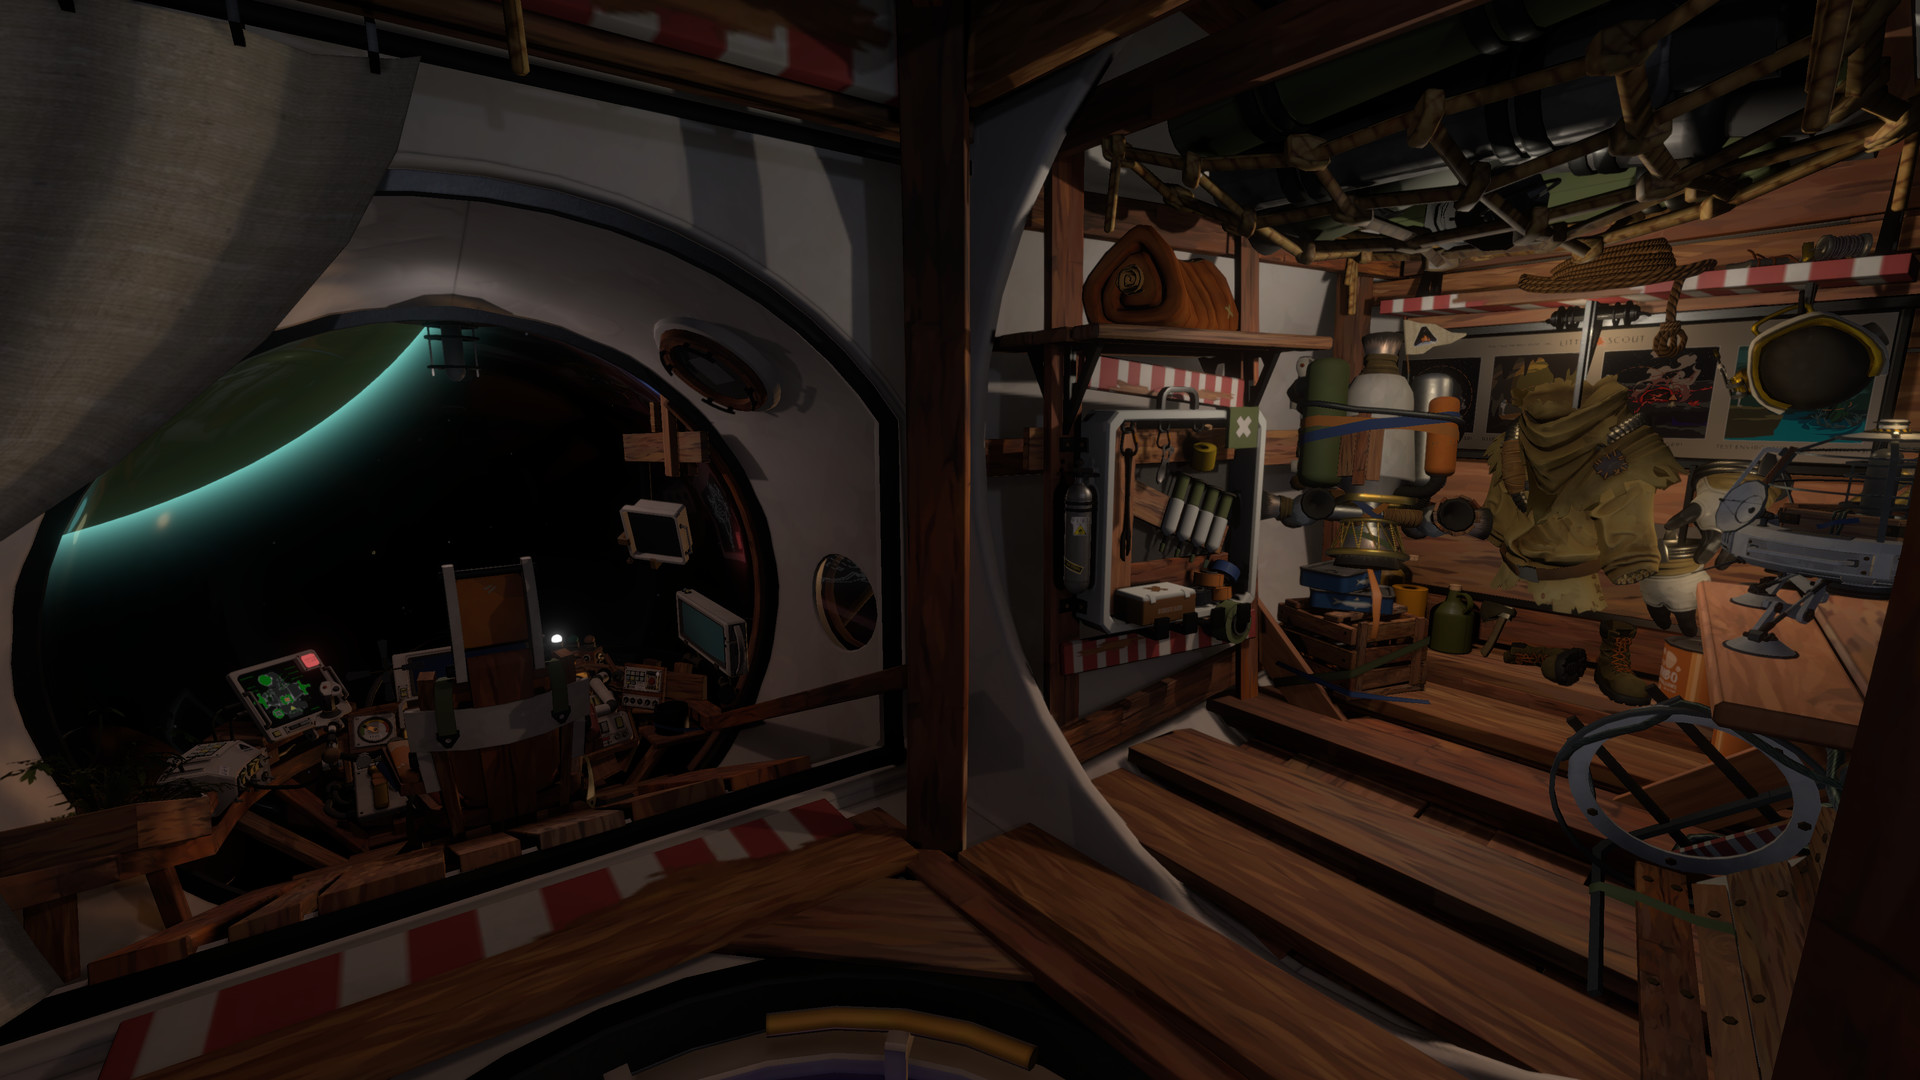 Outer Wilds | MA-Asia (fb231367-9c43-42eb-b2a1-295bfbfb20b3)